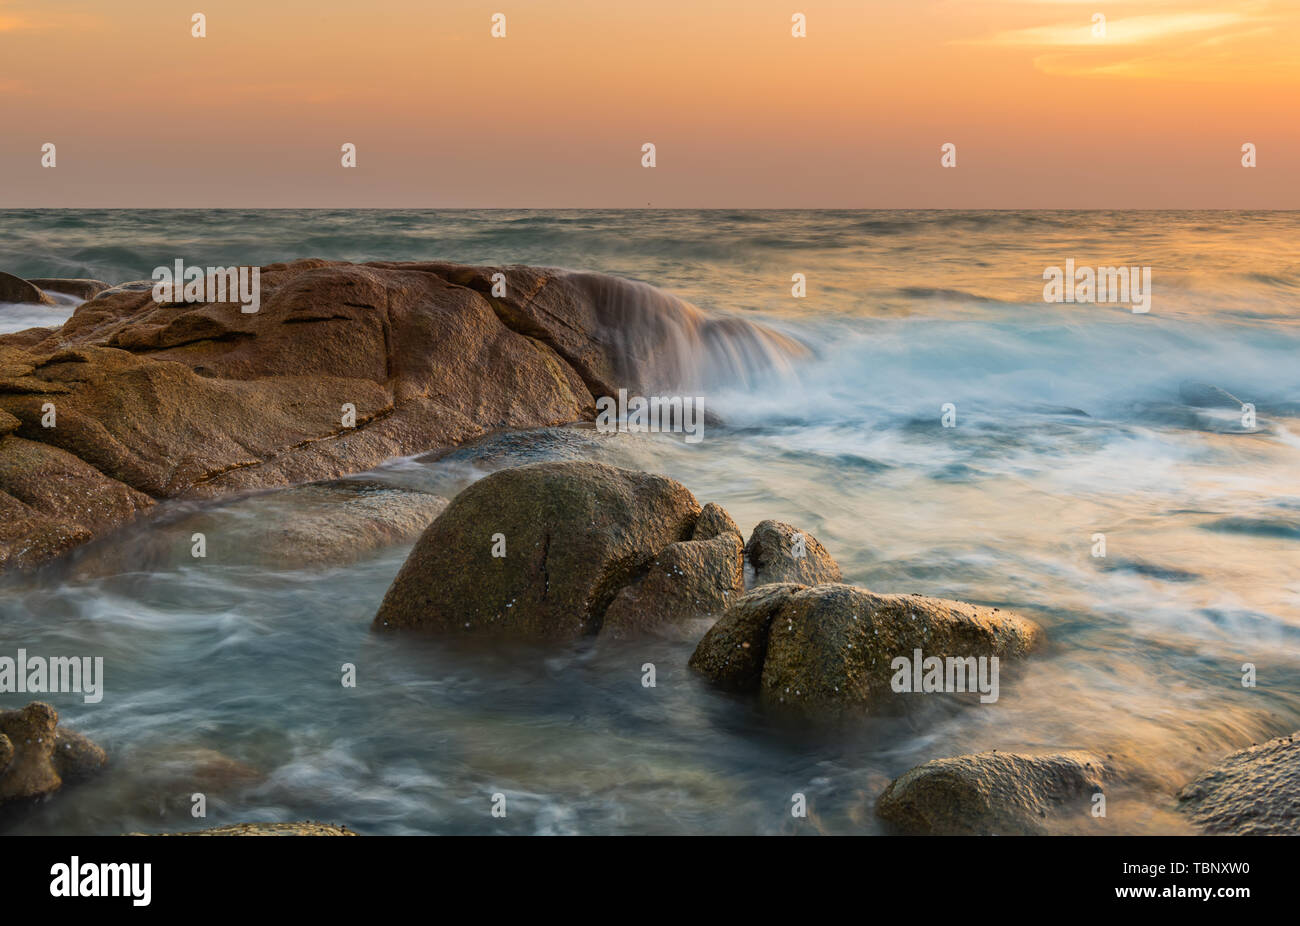 The rock and smooth sea wave in the sunset time photo with outdoor low and dark lighting seascape. Stock Photo